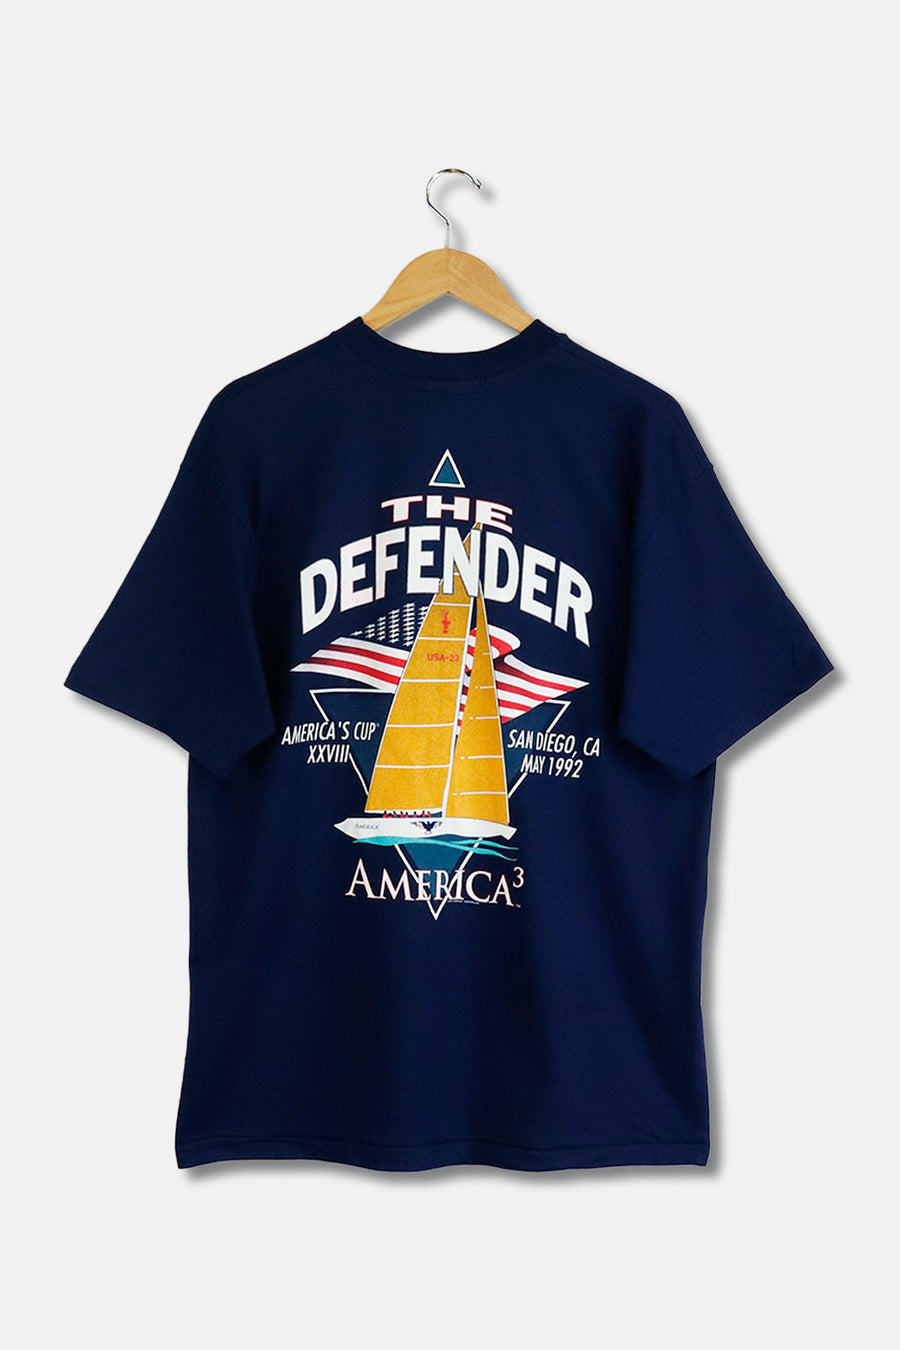 America's Cup T Shirt Sz L, XL Vintage 1992 XVIII Defense For The United States